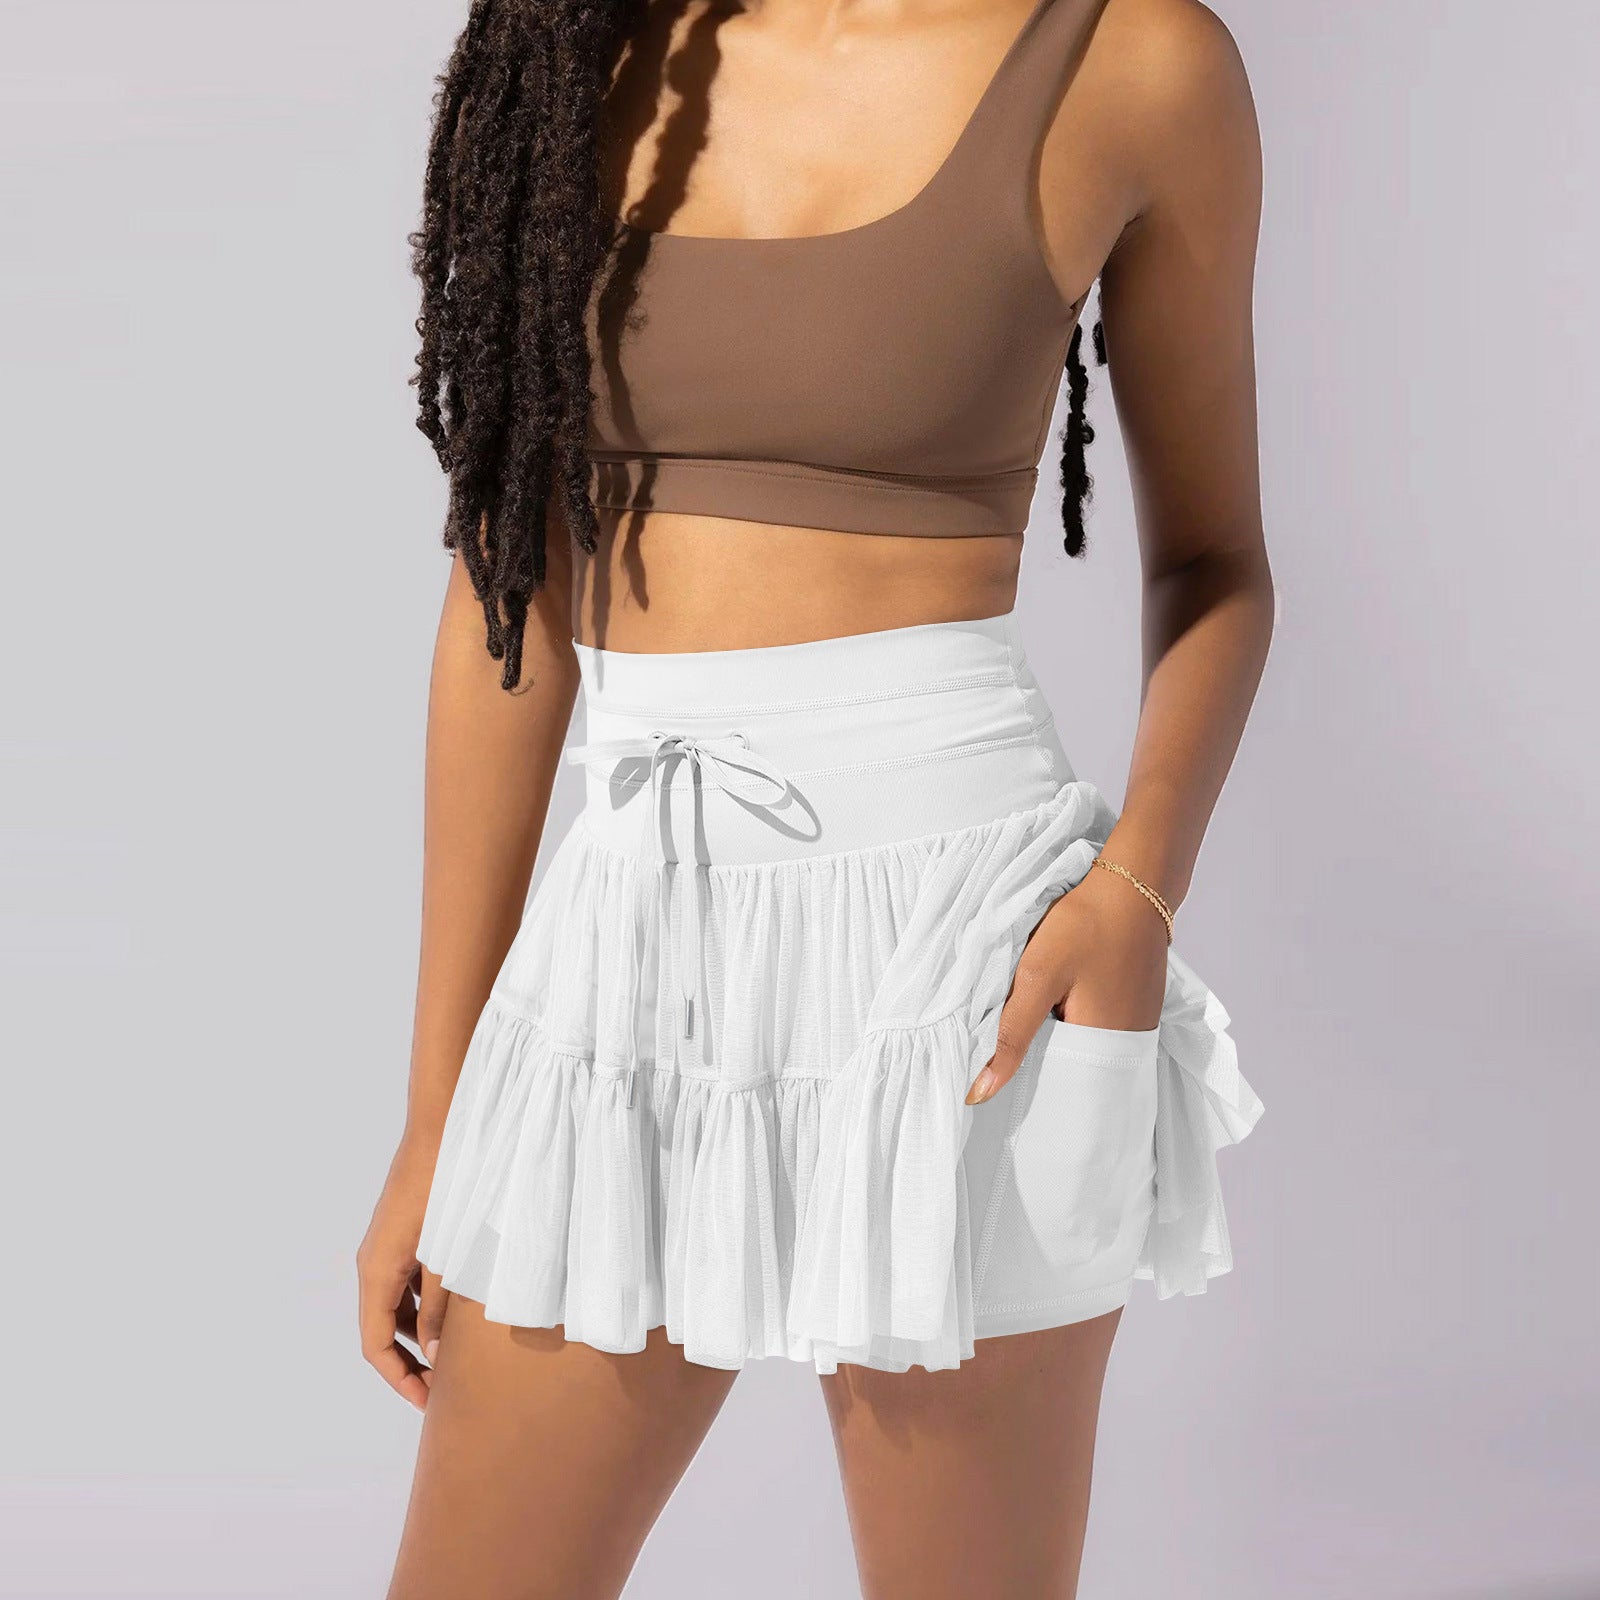 High Waist Lace-Up Sports Skirt with Safety Pants